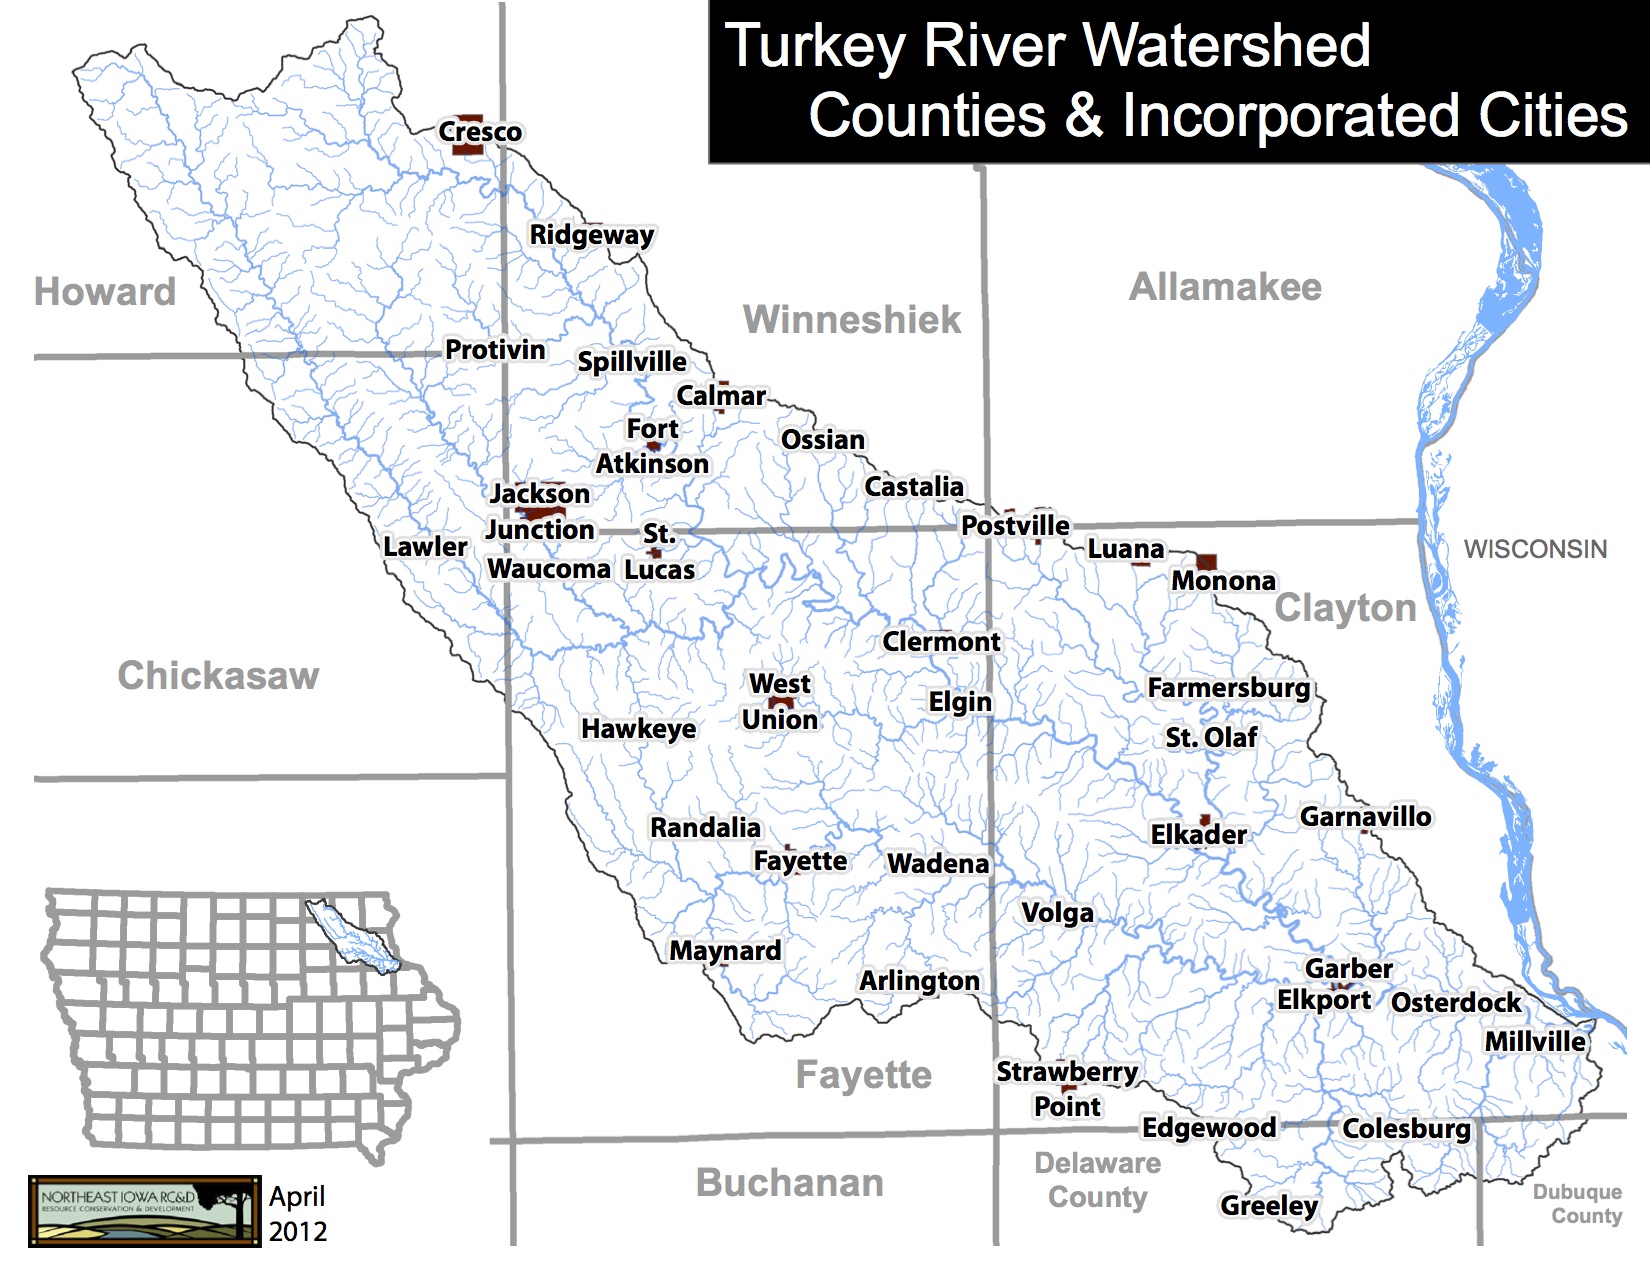 On the Home Stretch: Forming the Turkey River Watershed Management Authority